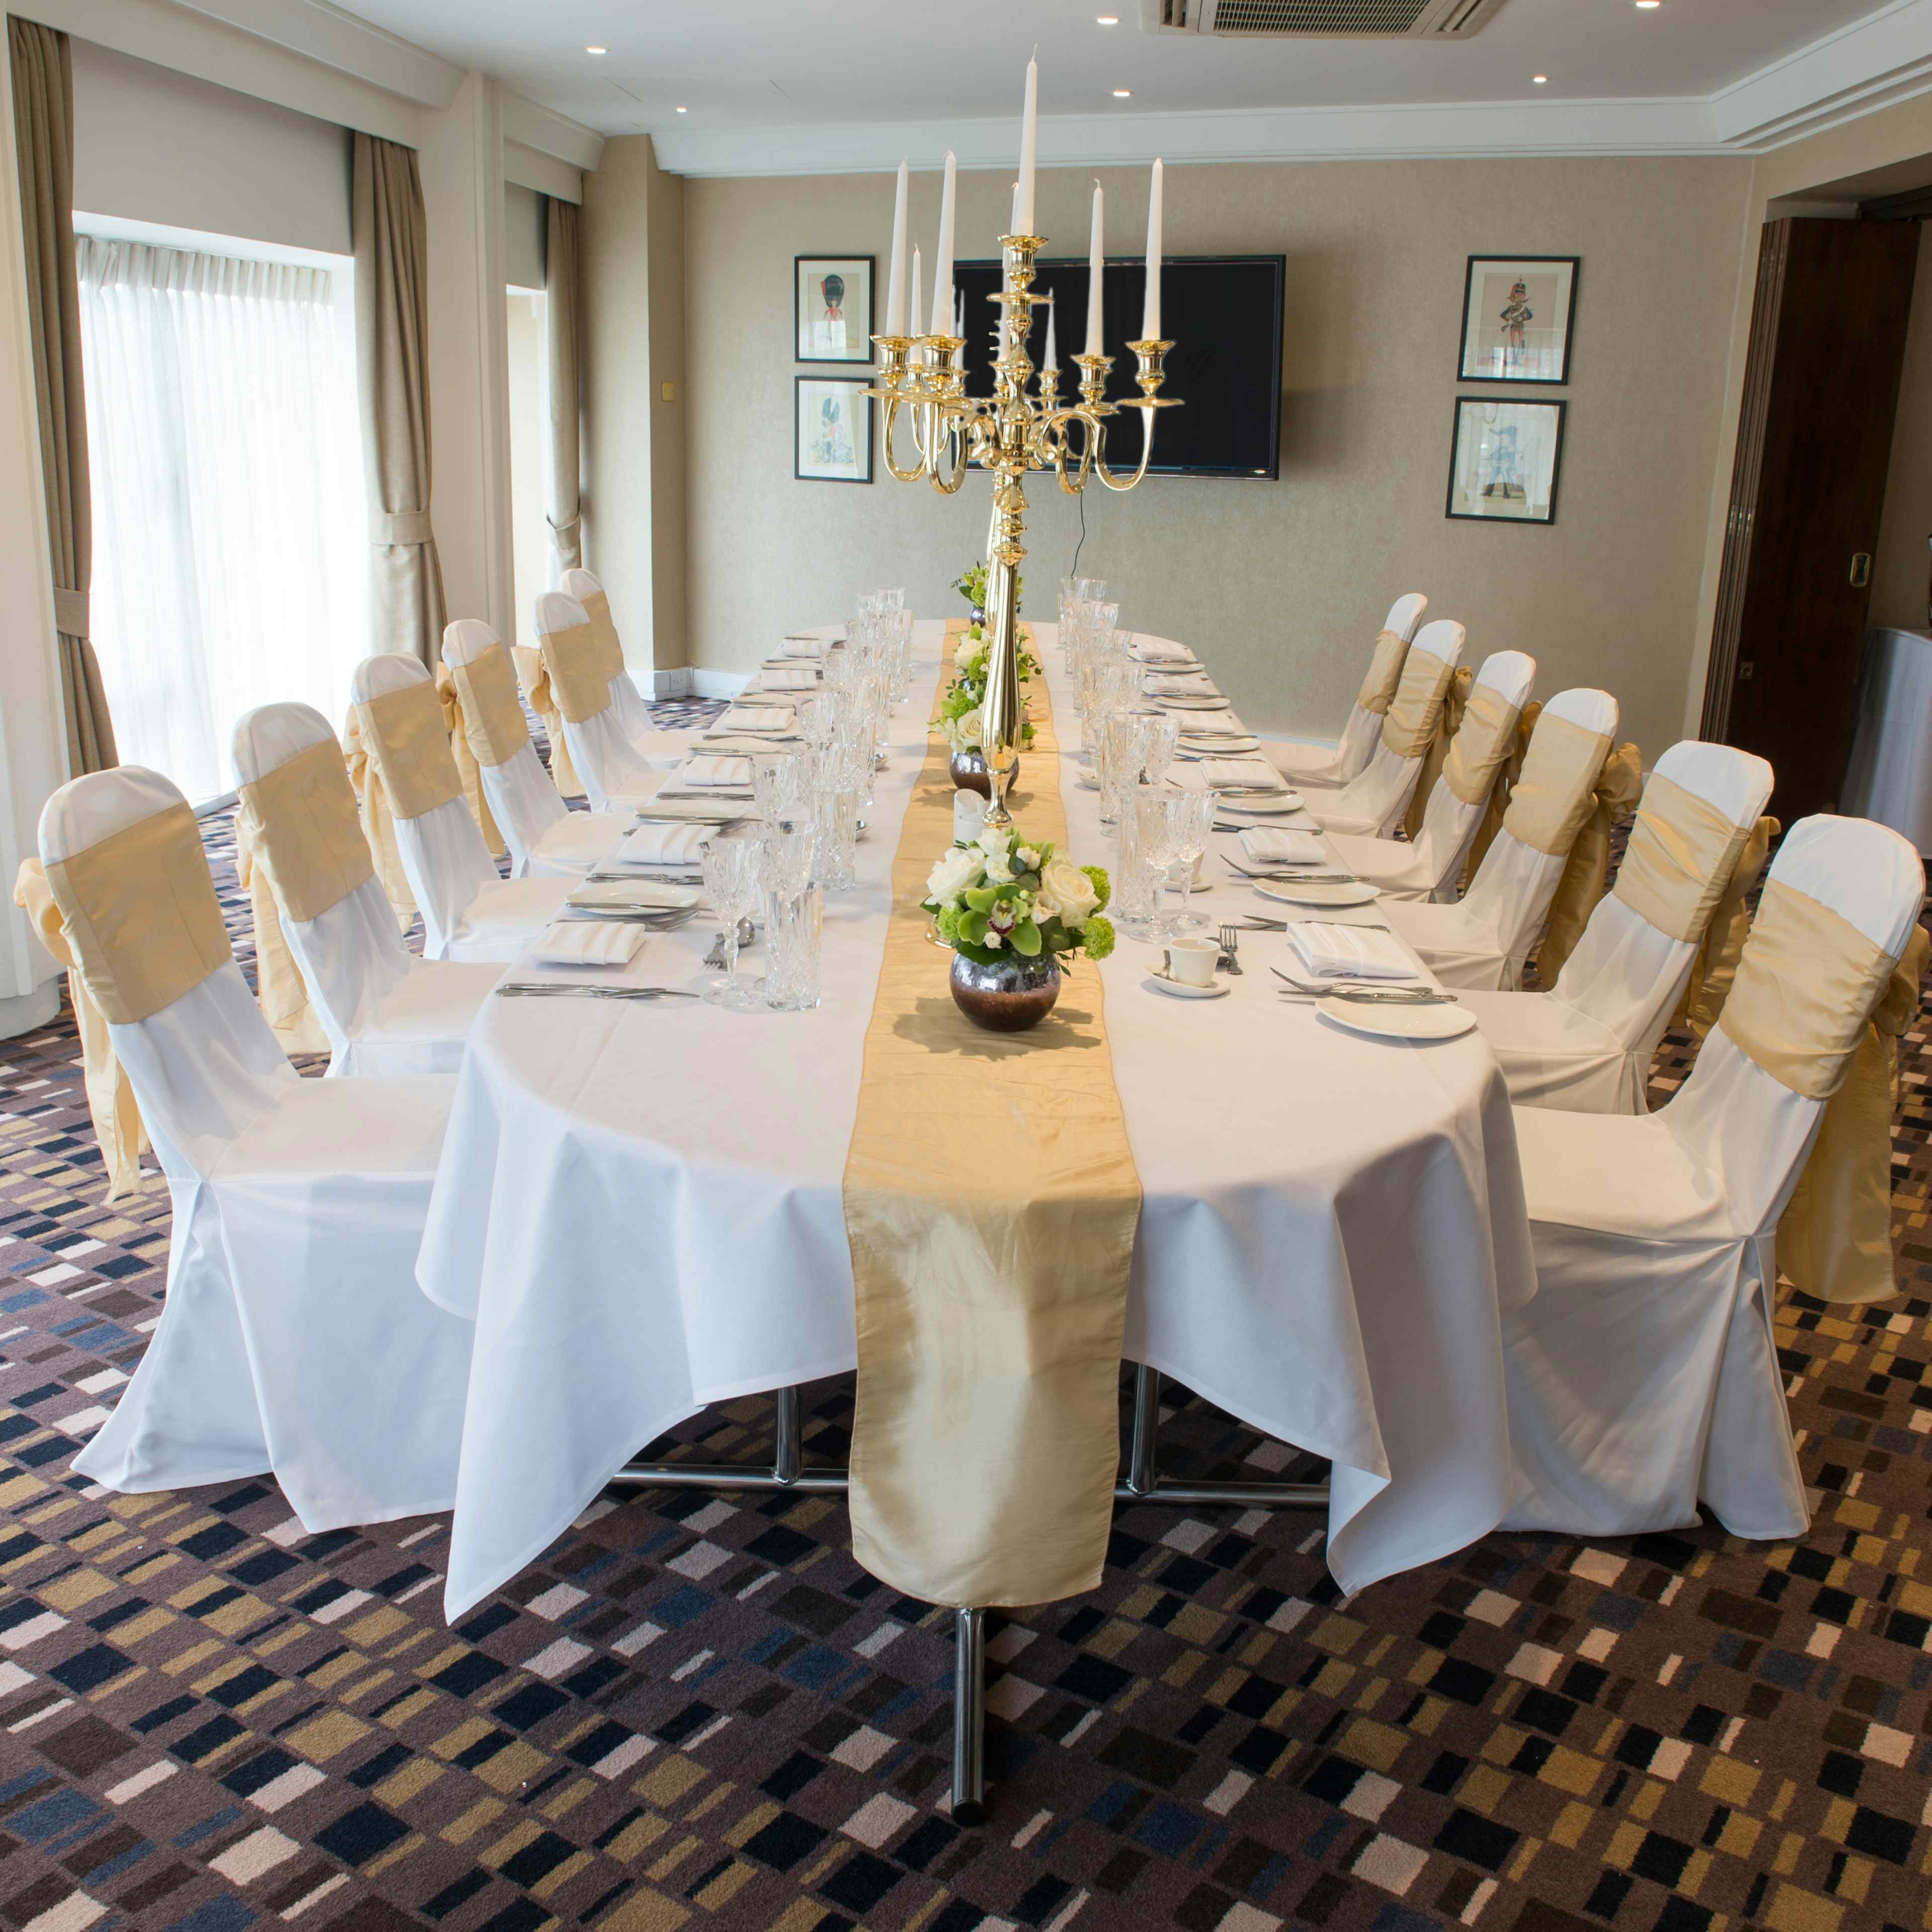 Victory Services Club - Allenby Room & Plumer image 3